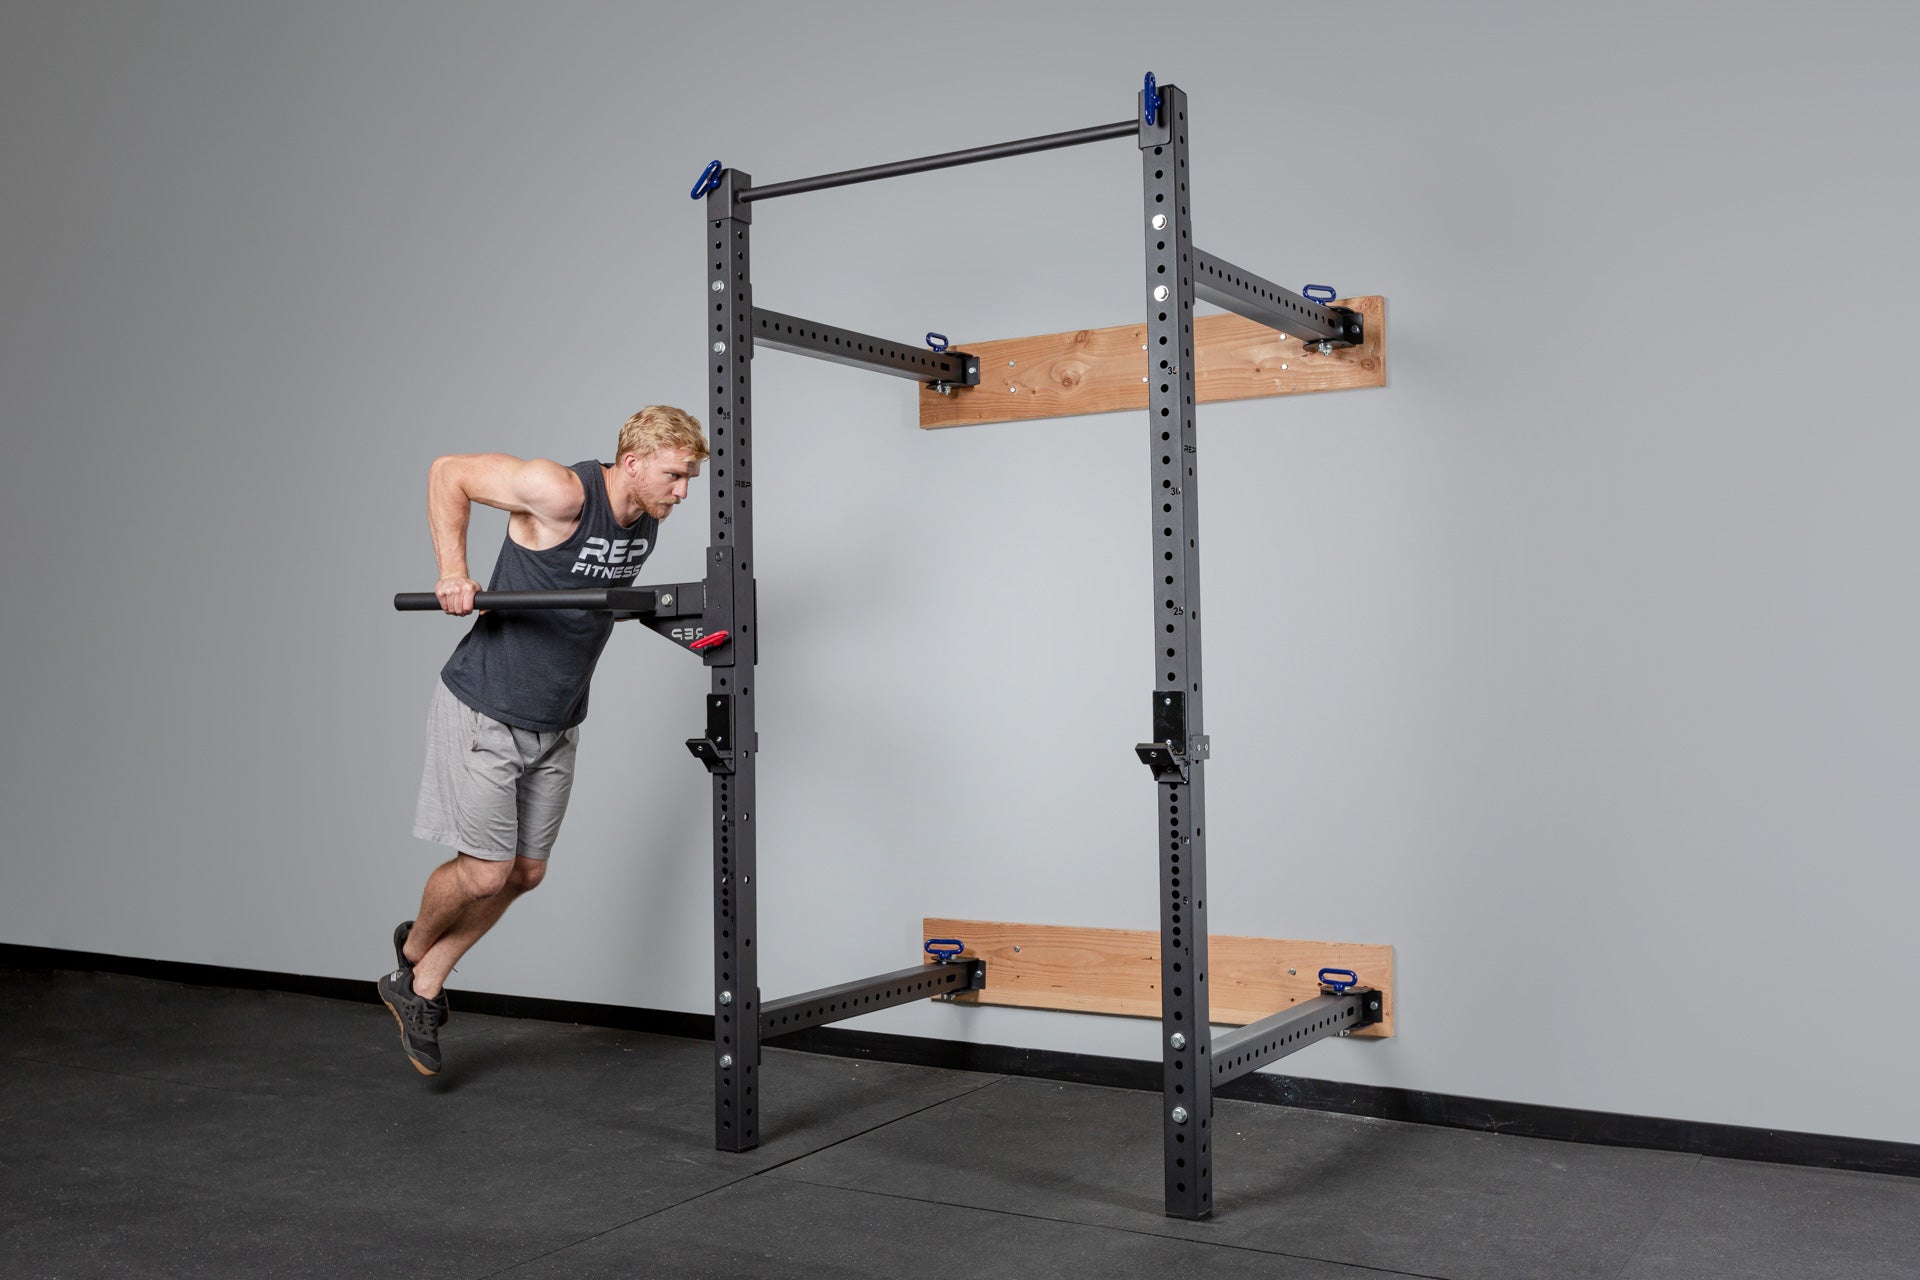 PR-4100 Folding Squat Rack with Dip Station Installed and Being Used for Dips